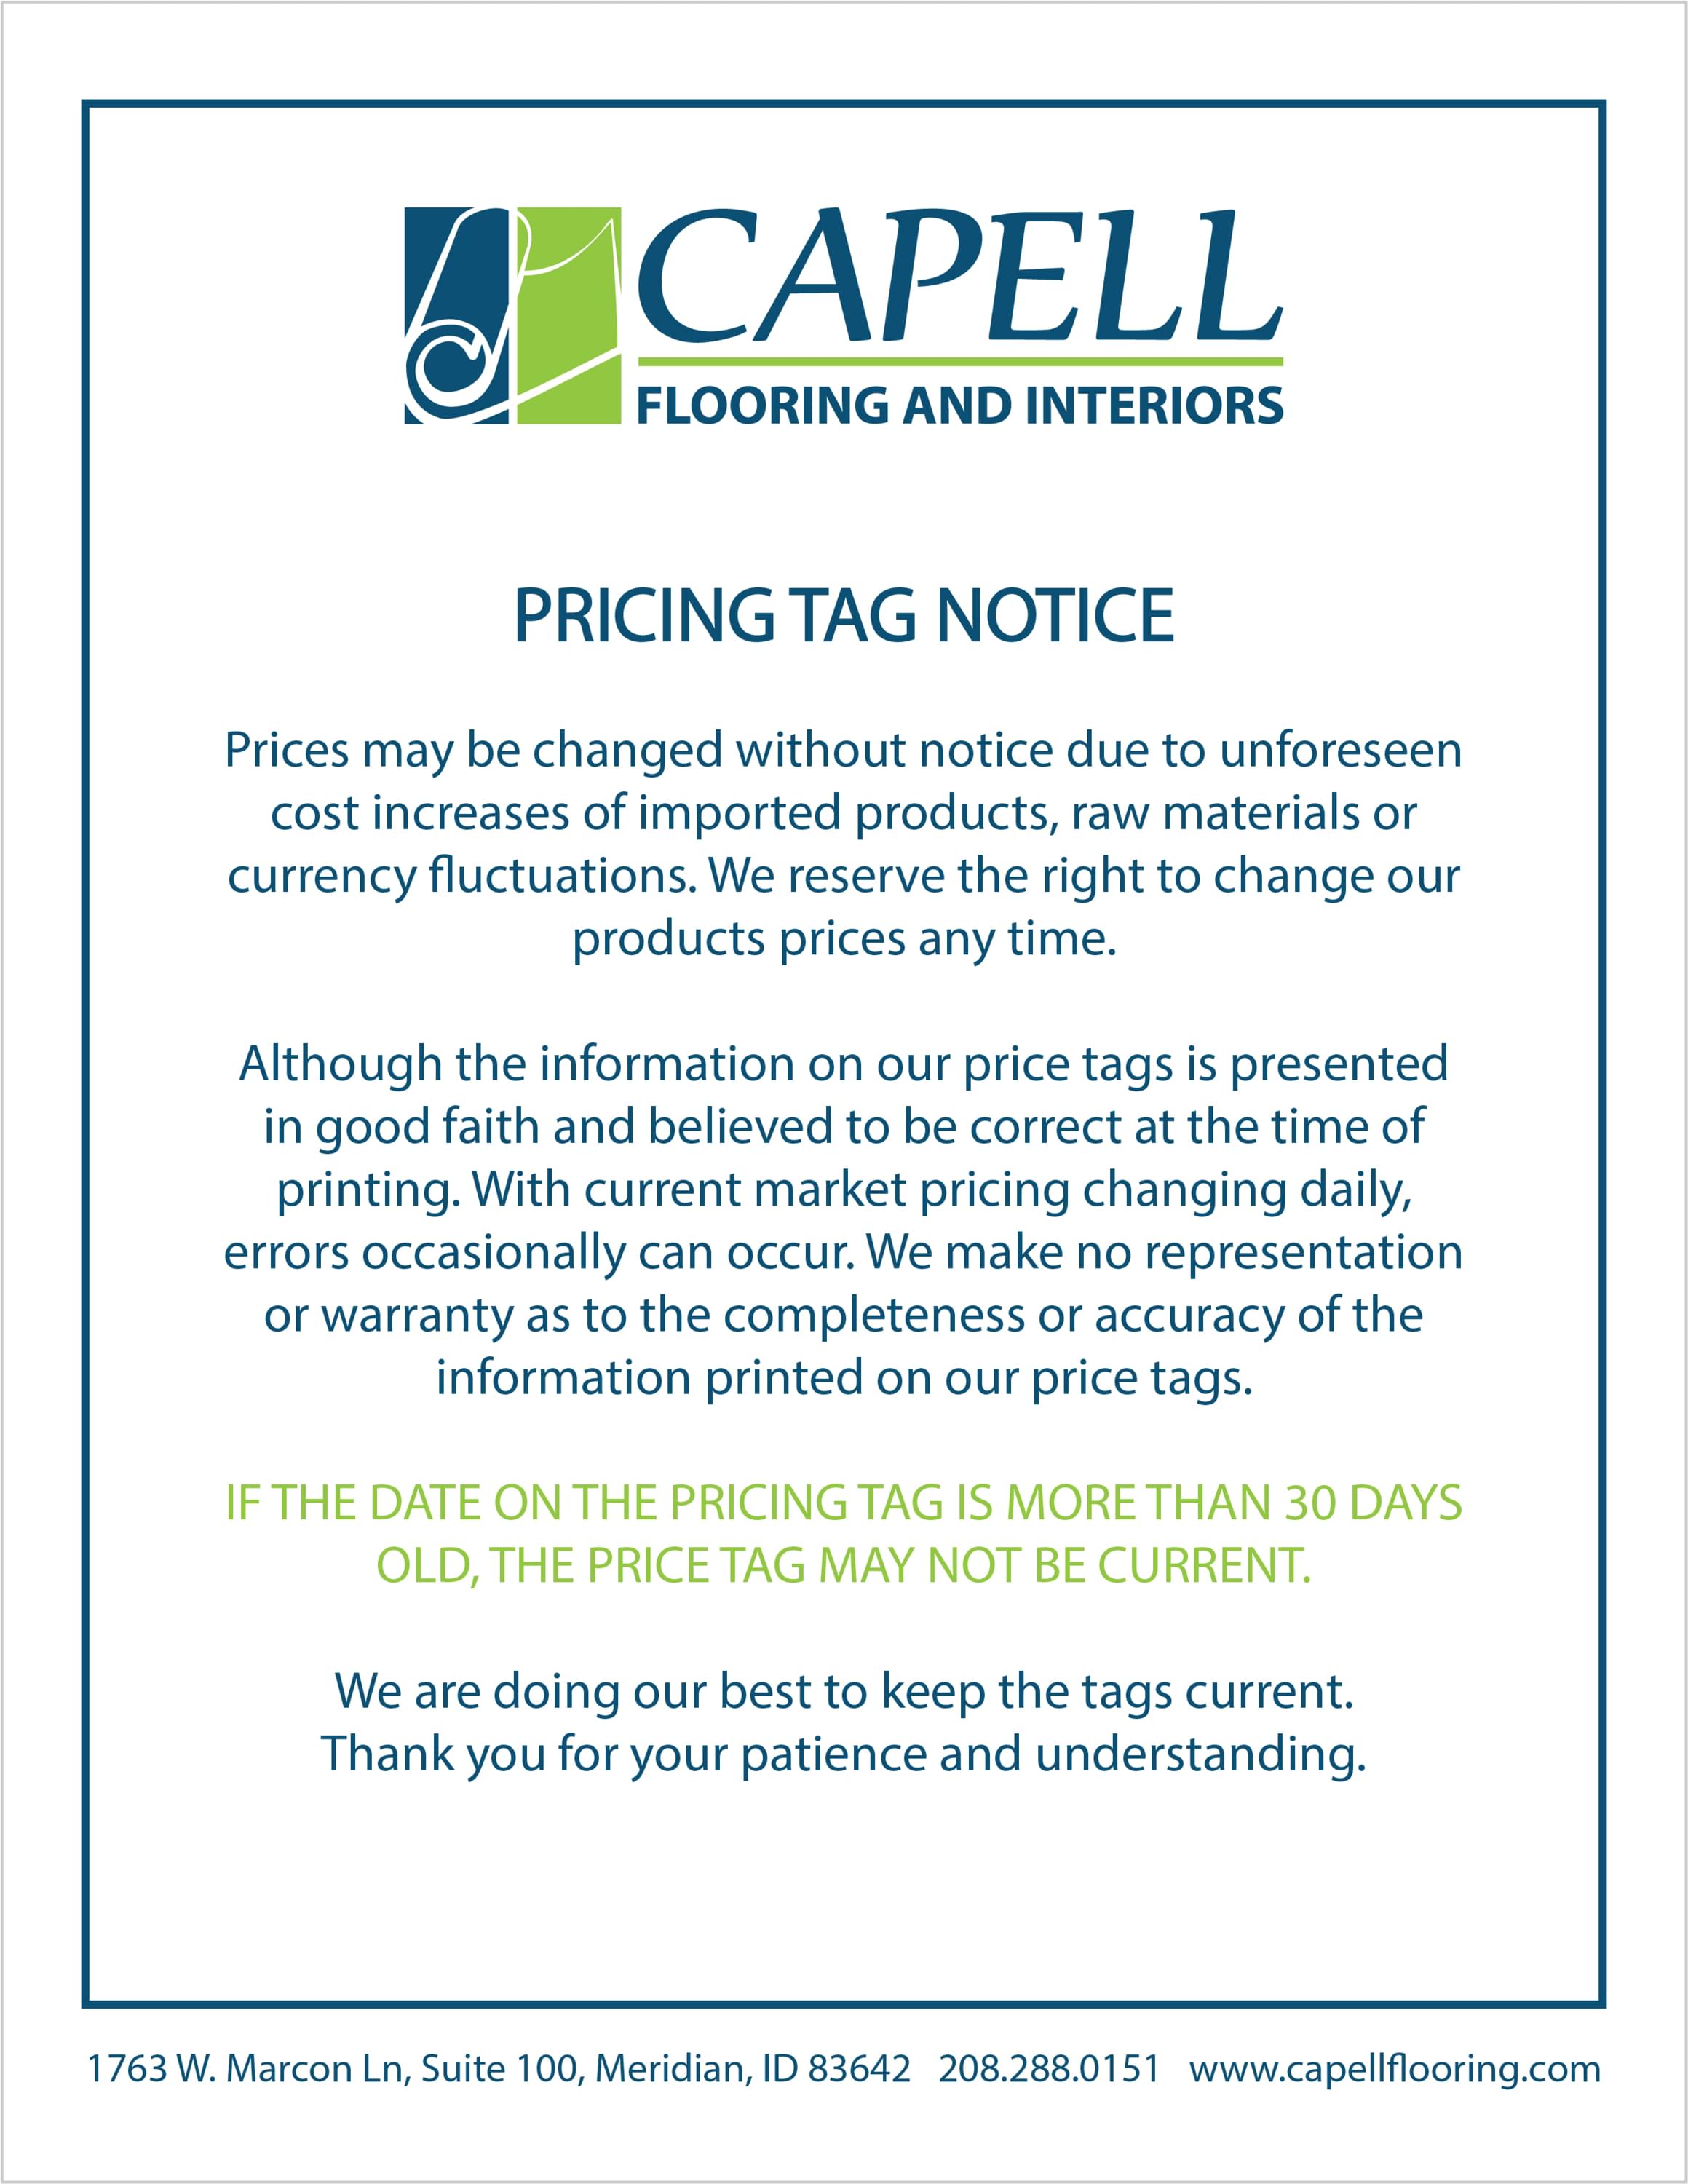 Capell Flooring and Interiors Pricing